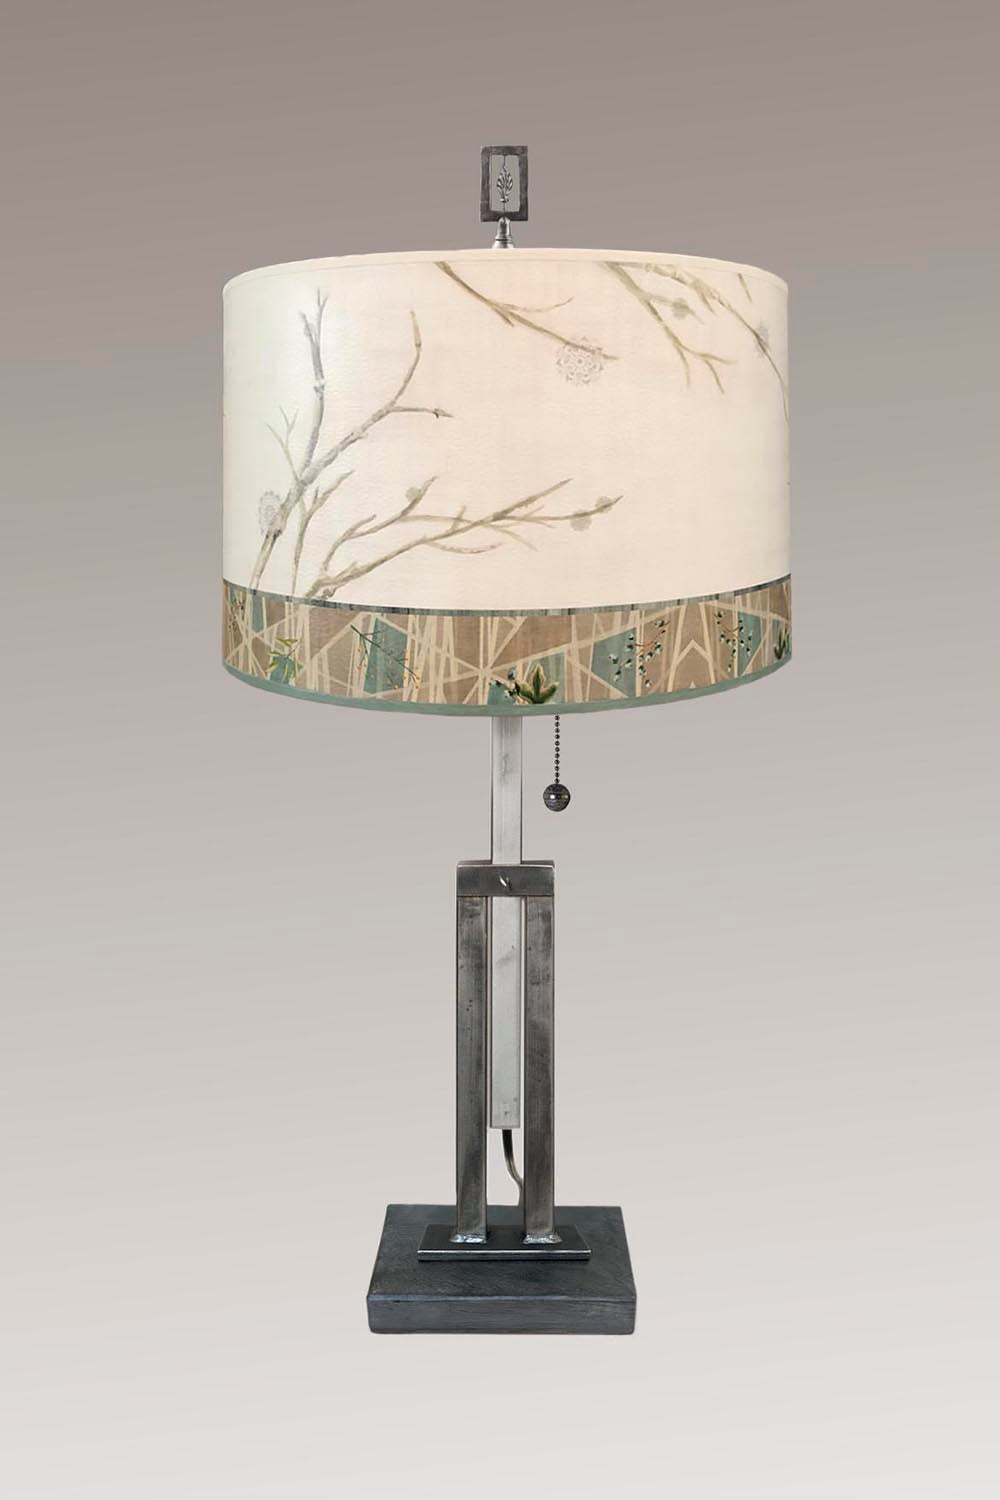 Adjustable-Height Steel Table Lamp with Large Drum Shade in Prism Branch